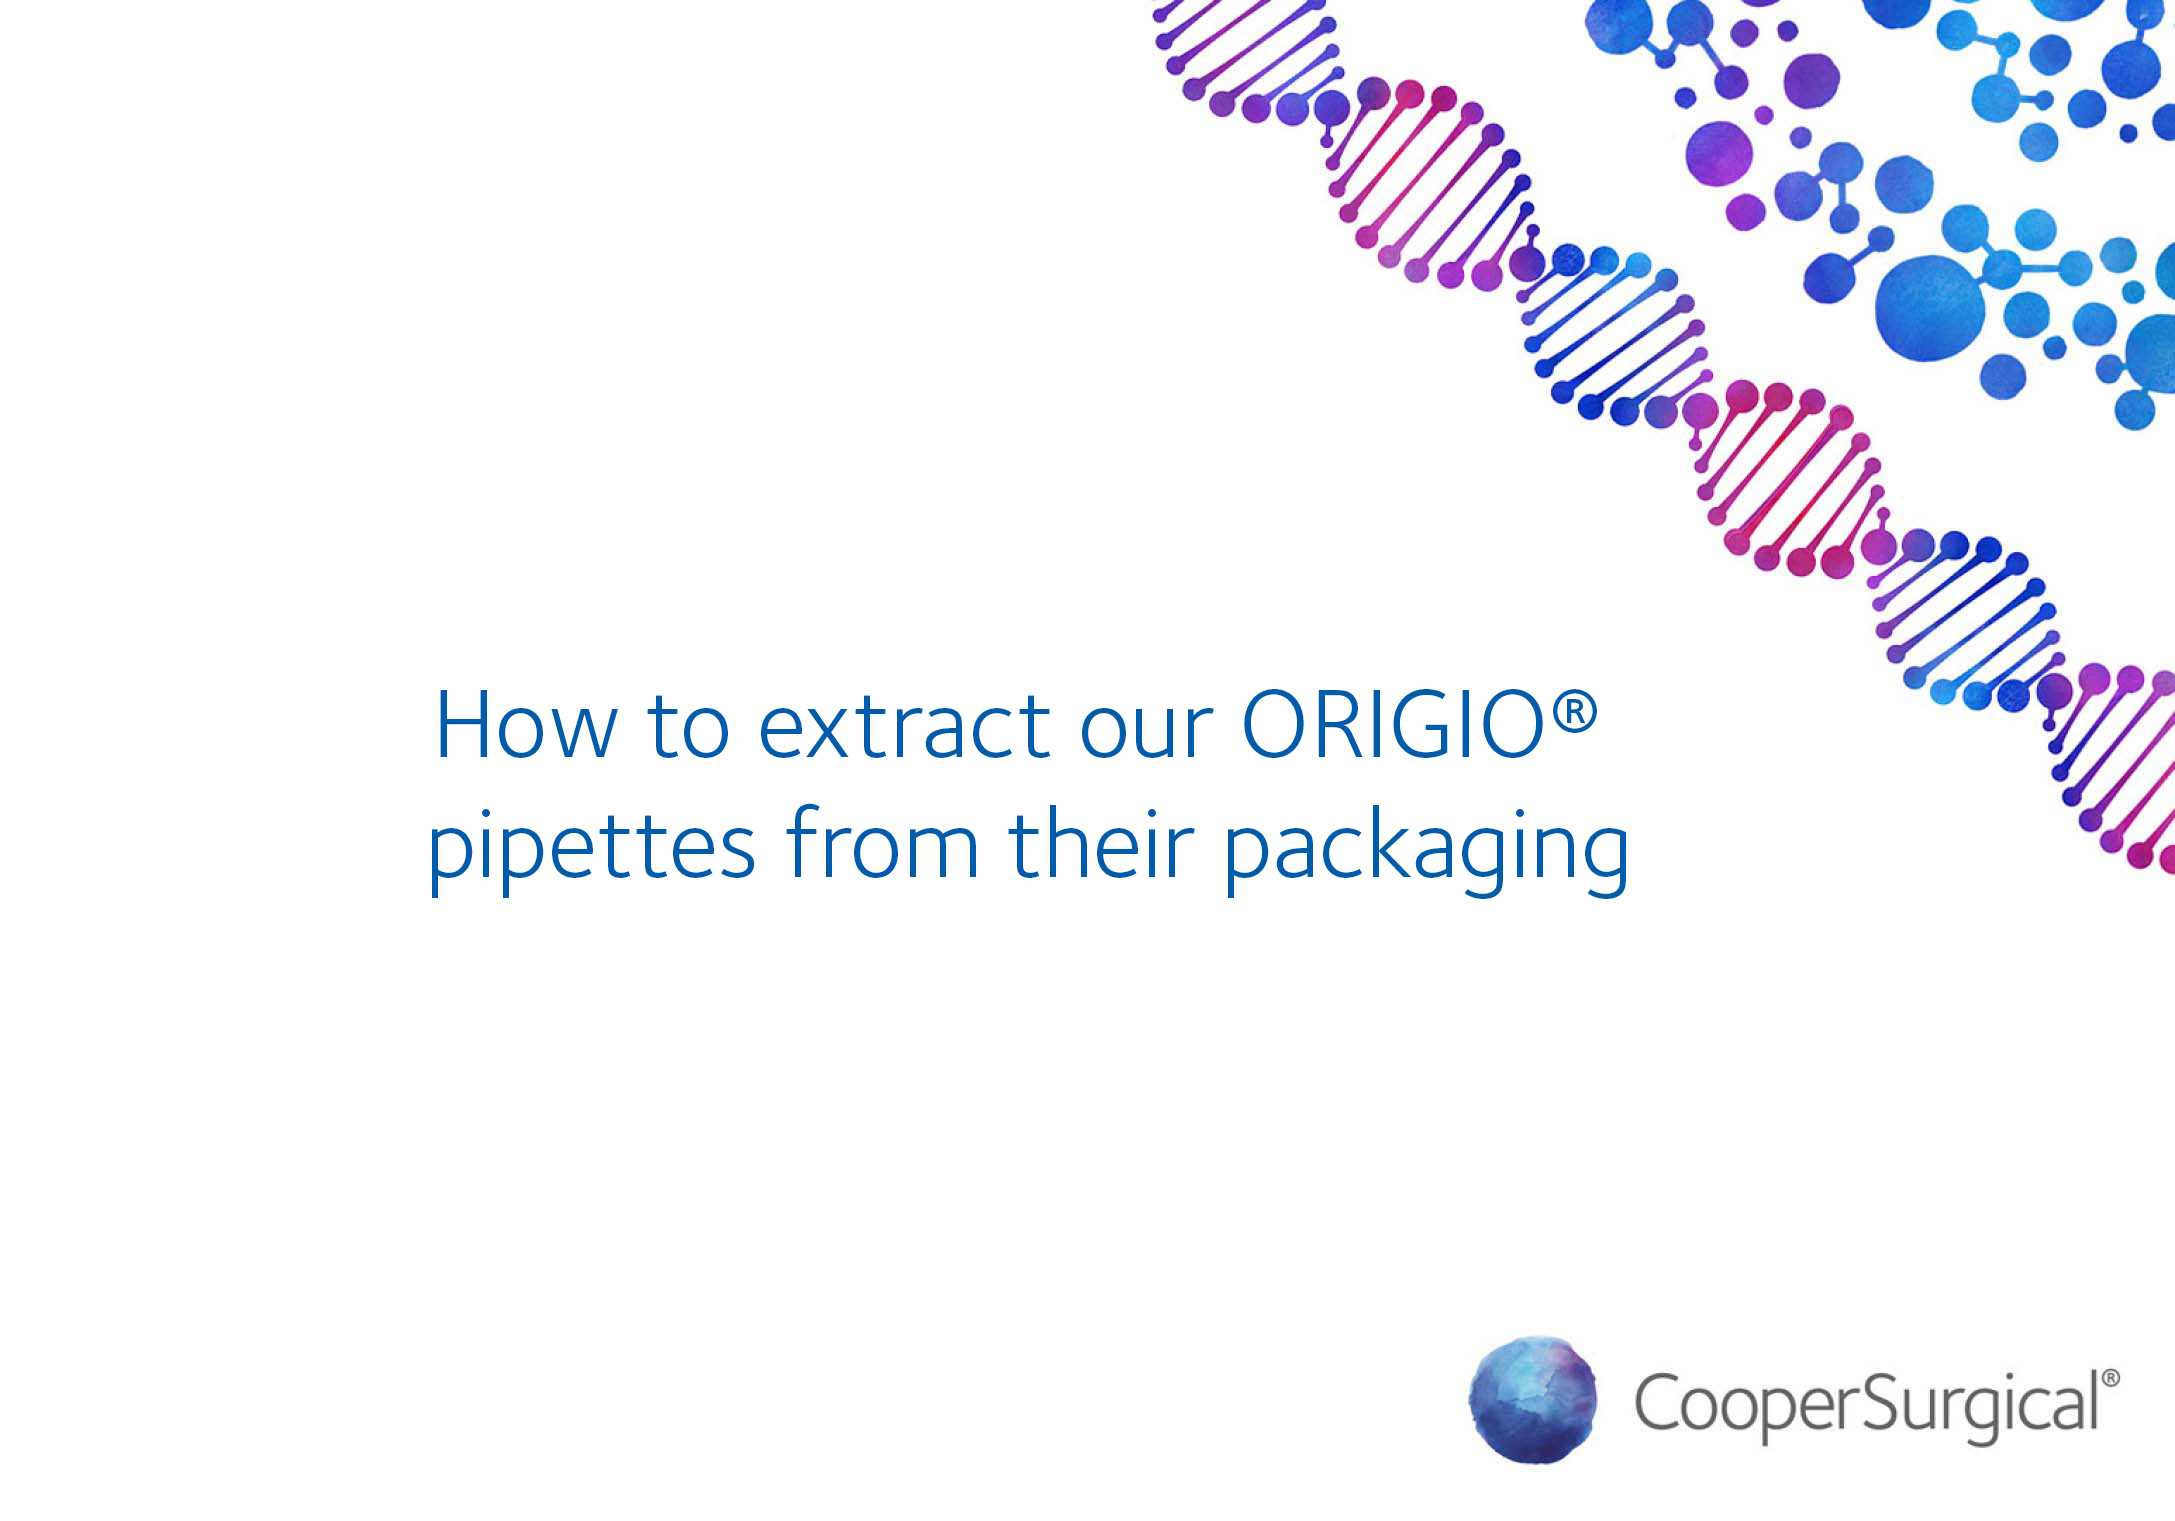 How to extract our ORIGIO pipettes from their packaging